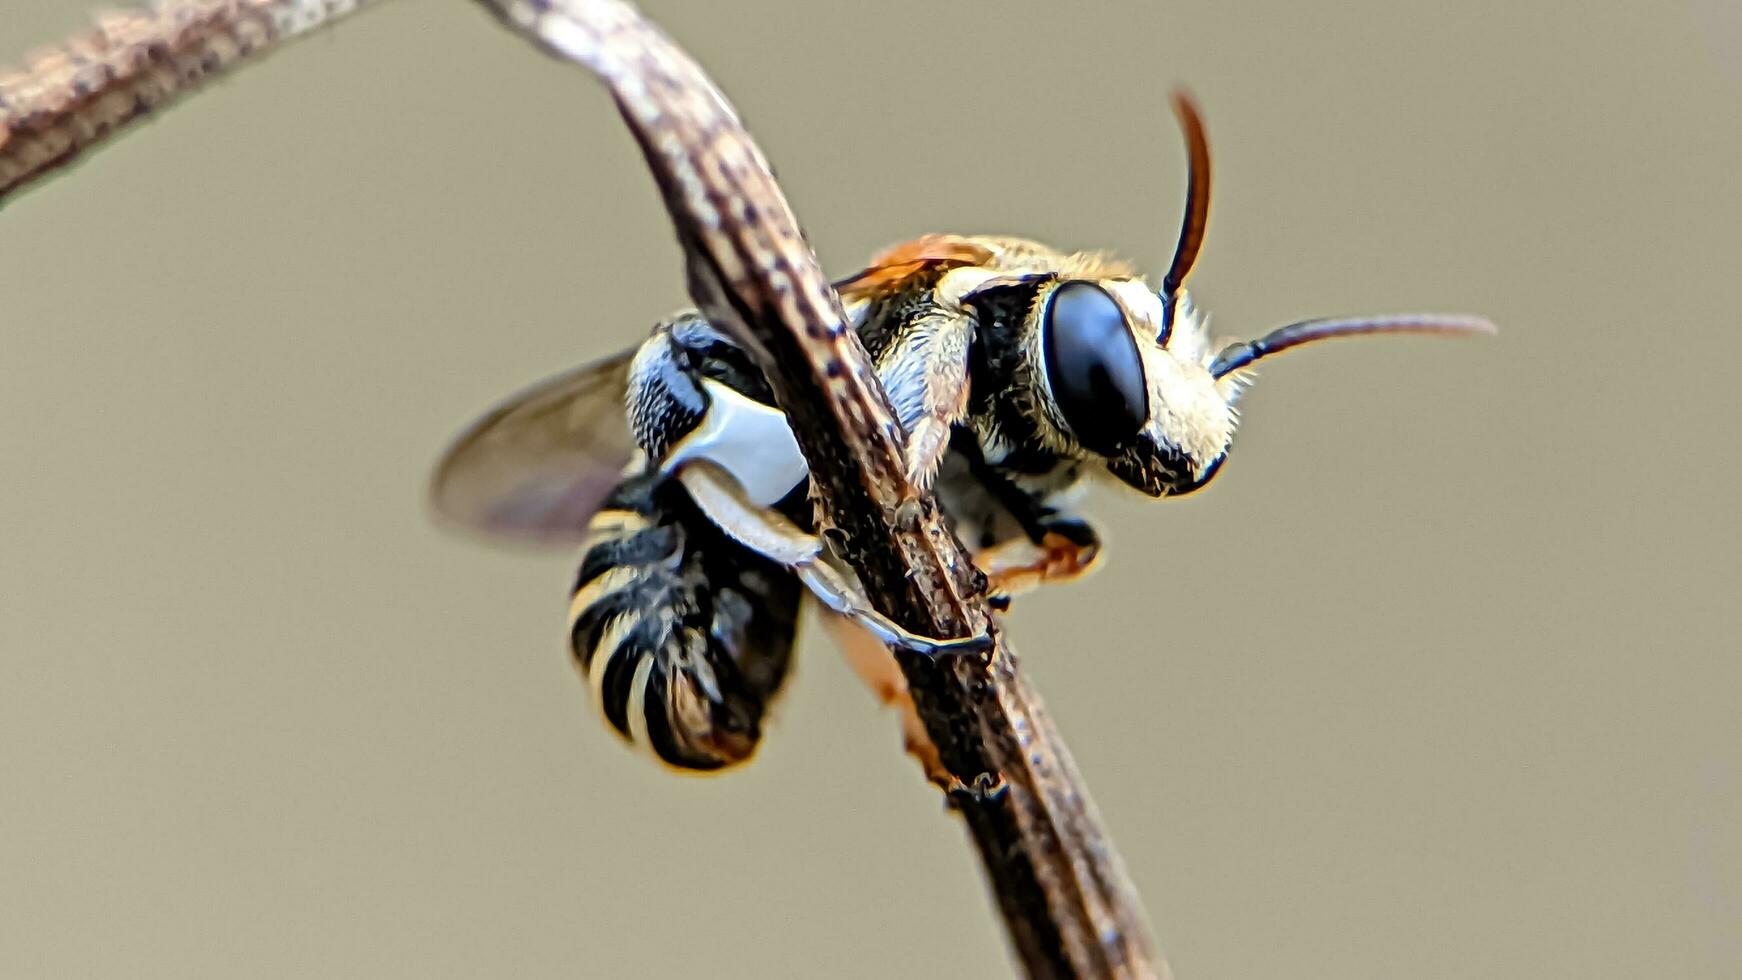 nomia, close-up of a honey bee on a grass stem photo